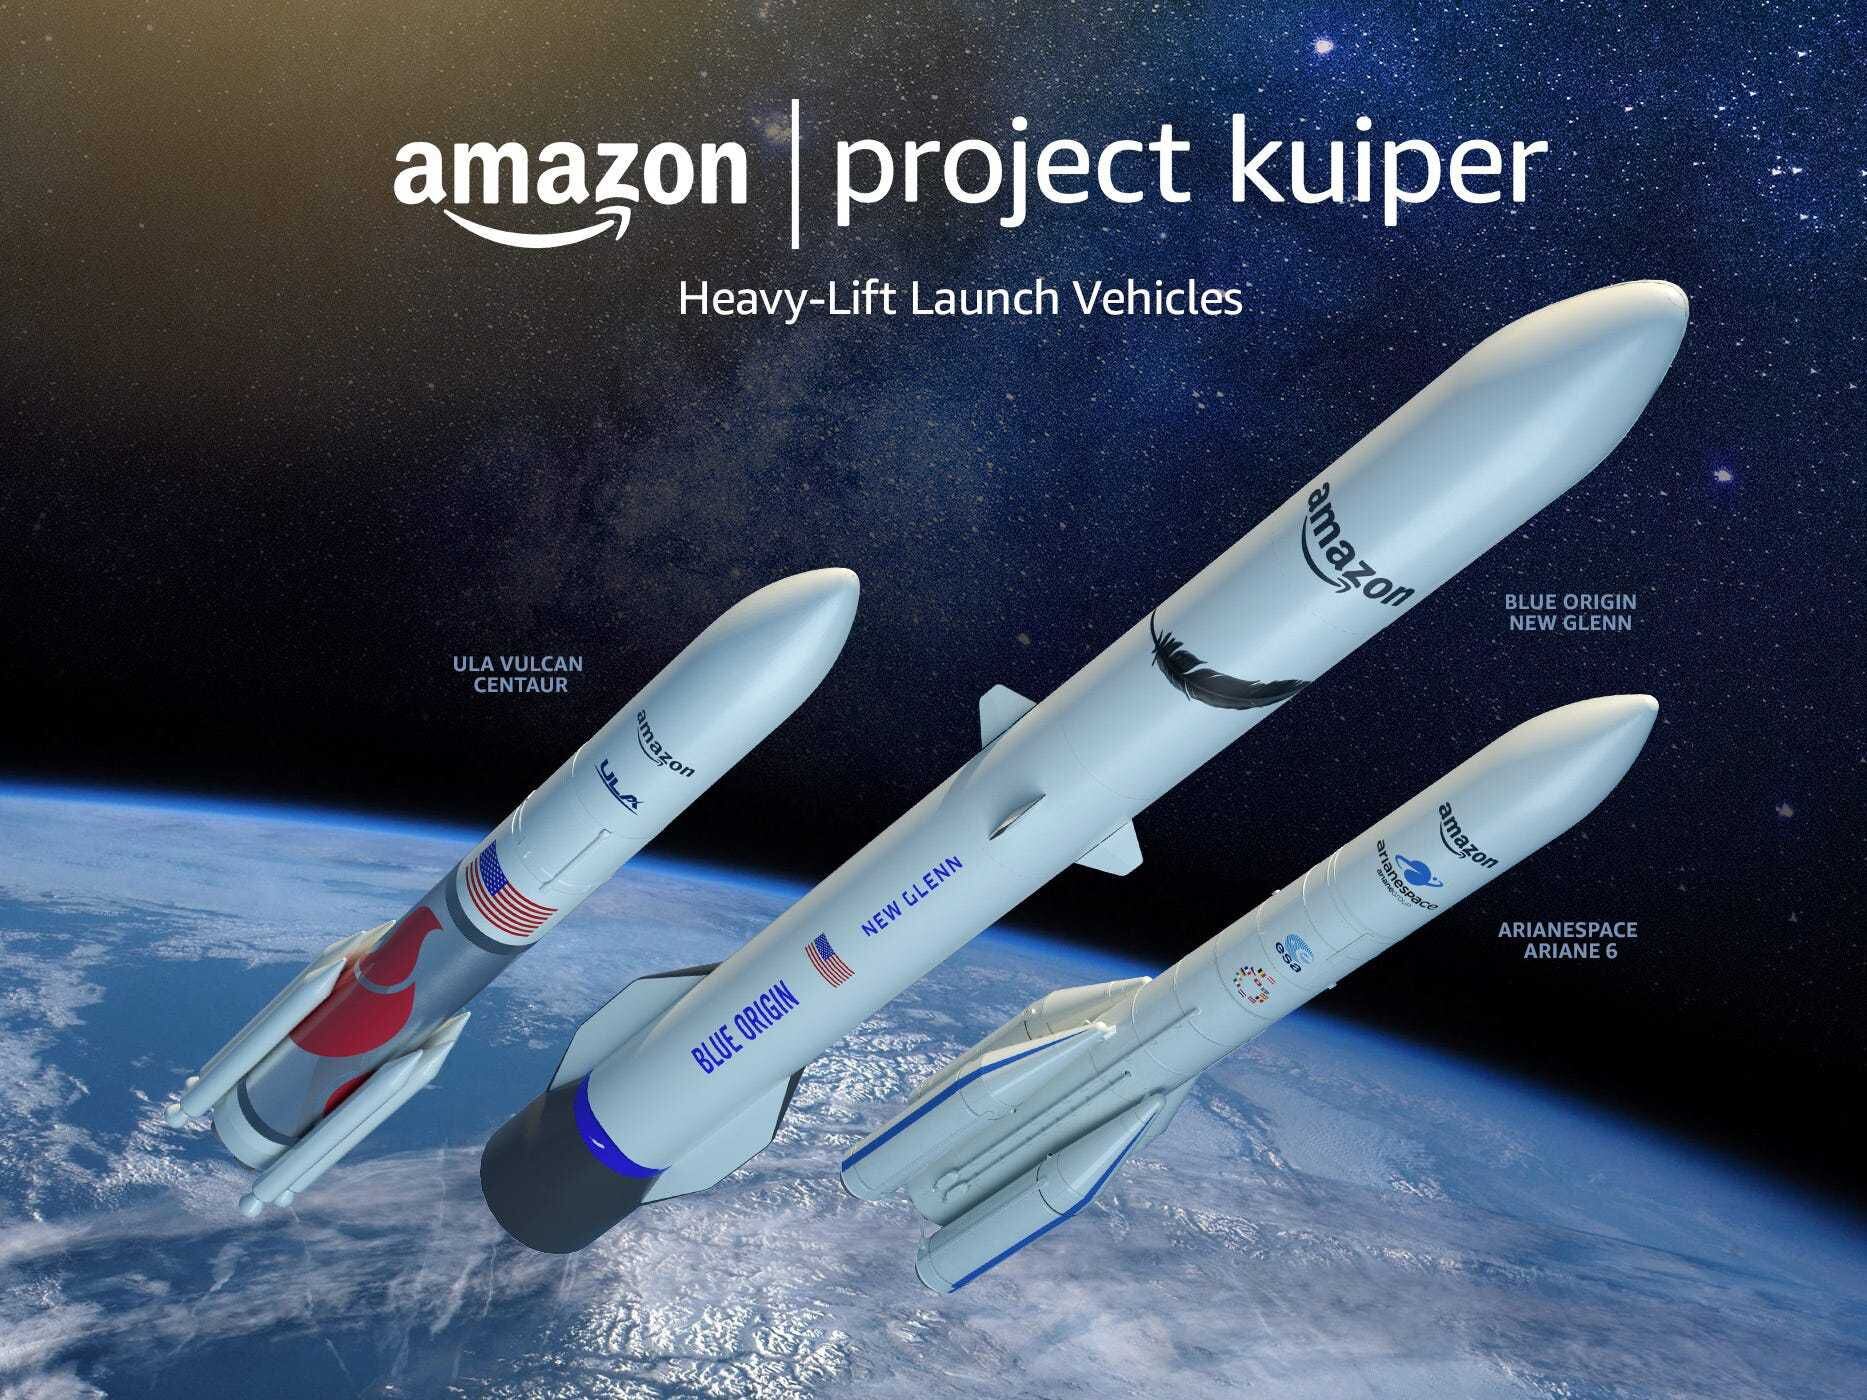 Amazon links up with rocket companies to provide affordable broadband